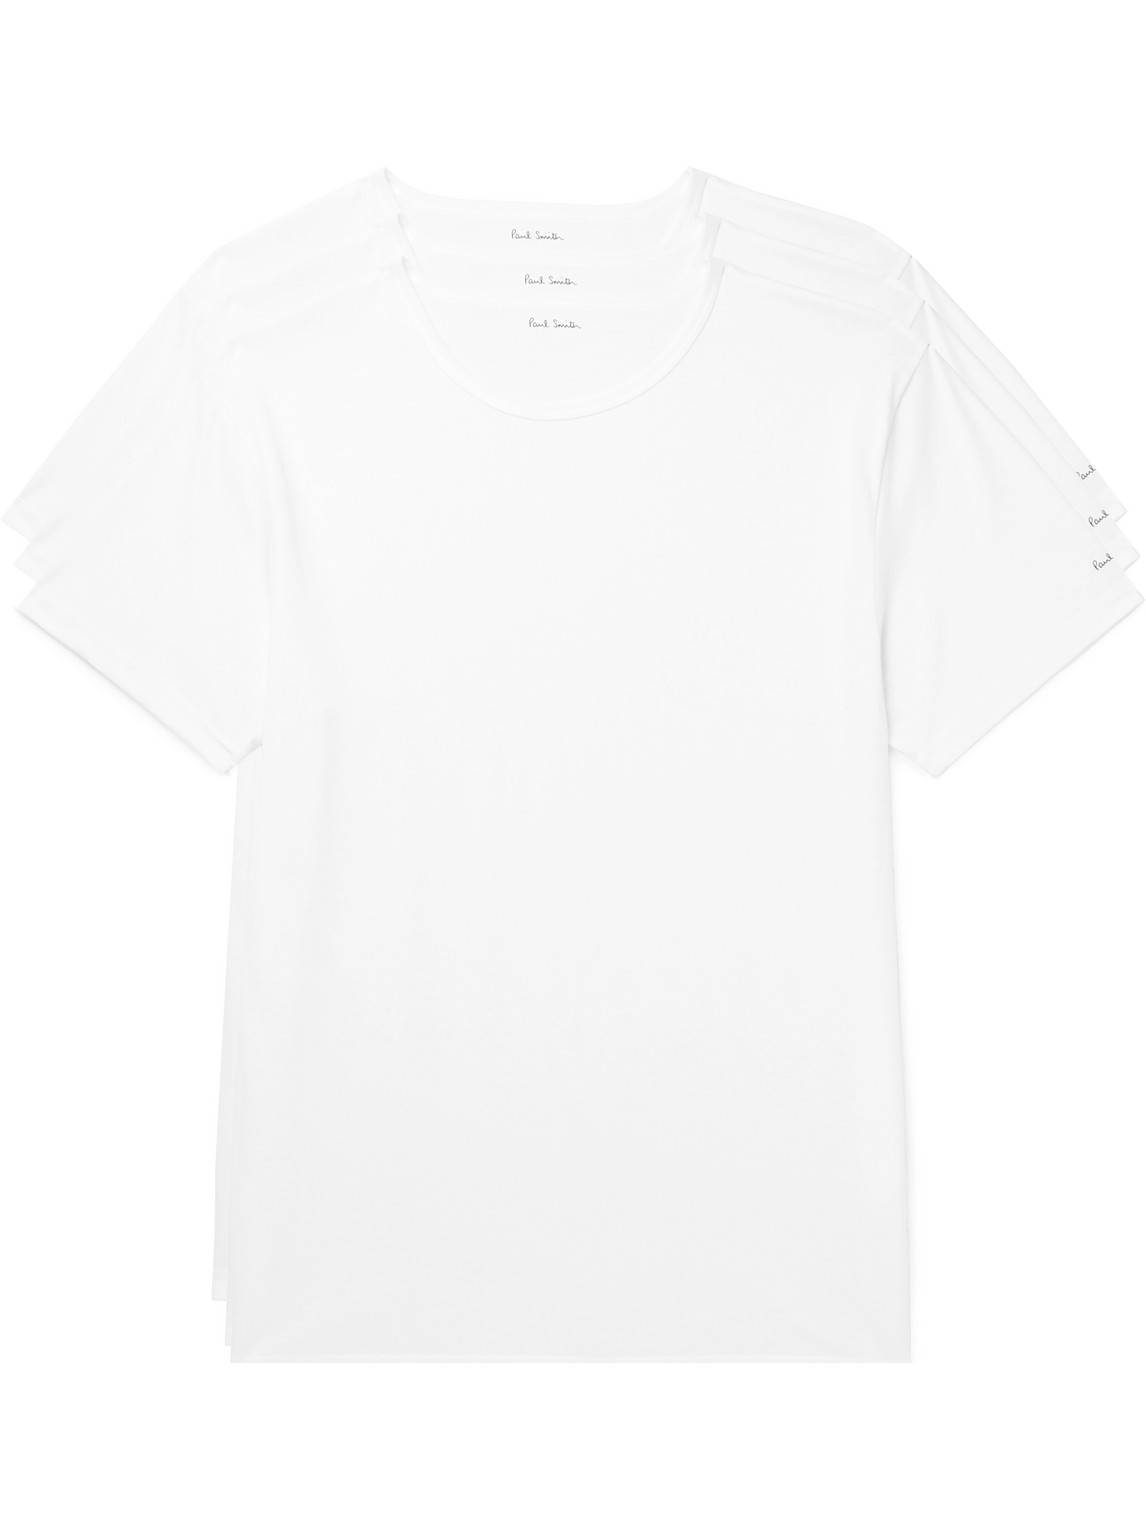 Paul Smith Three-Pack Slim-Fit Cotton-Jersey T-Shirts